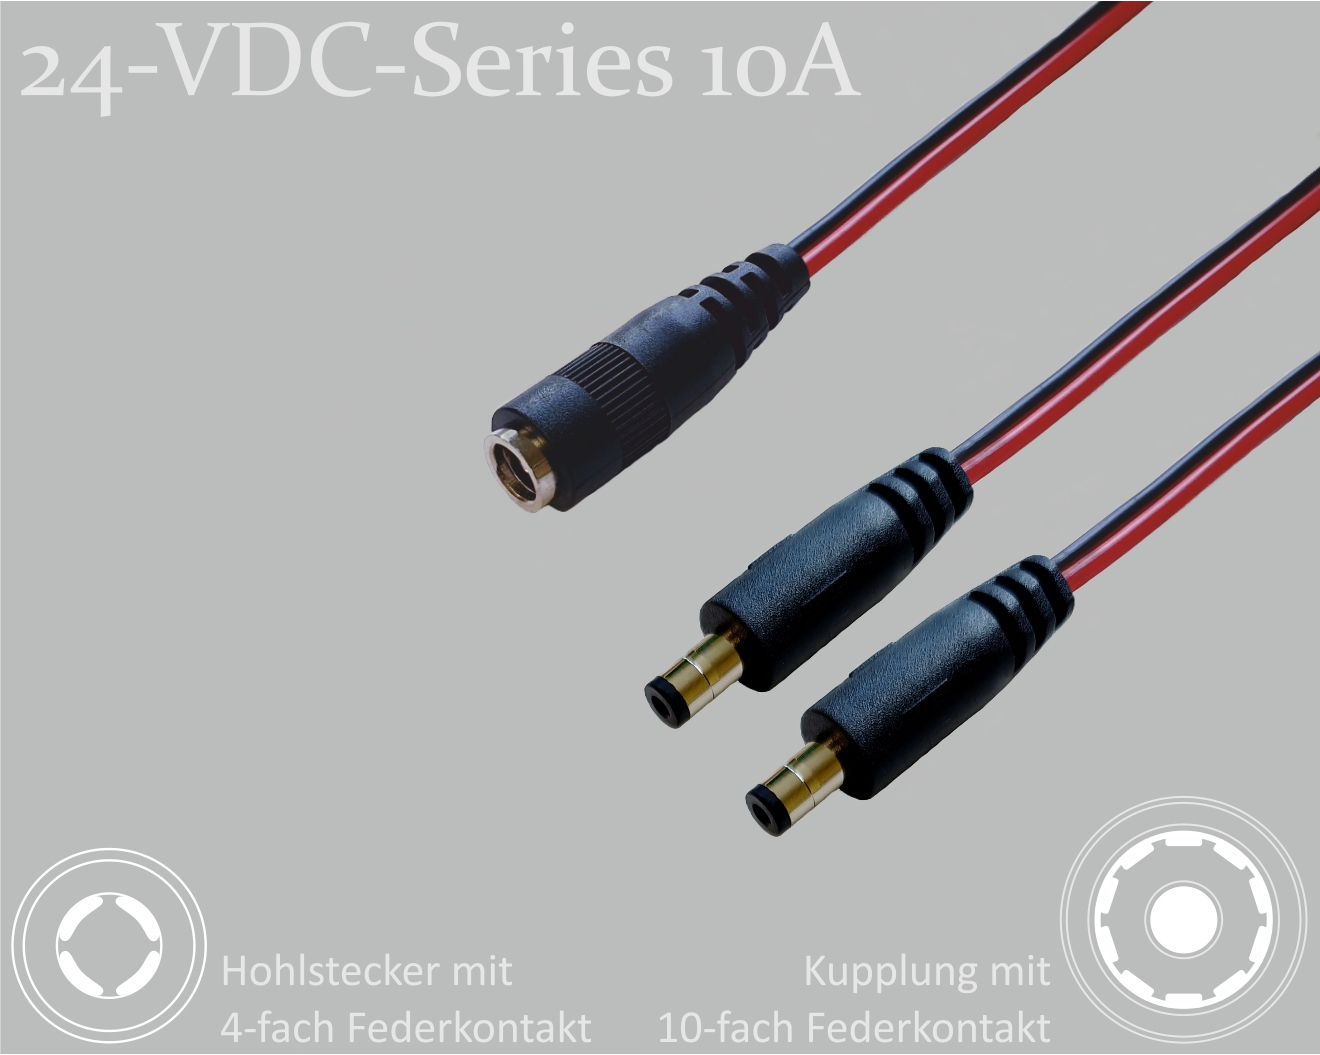 24-VDC-Series 10A, DC distributor 1x DC coupling with 10-spring contact to 2x DC plug with 4-spring contact, 2.5x5.5mm, flat cable 2x0.75mm², red/black, 0.3m